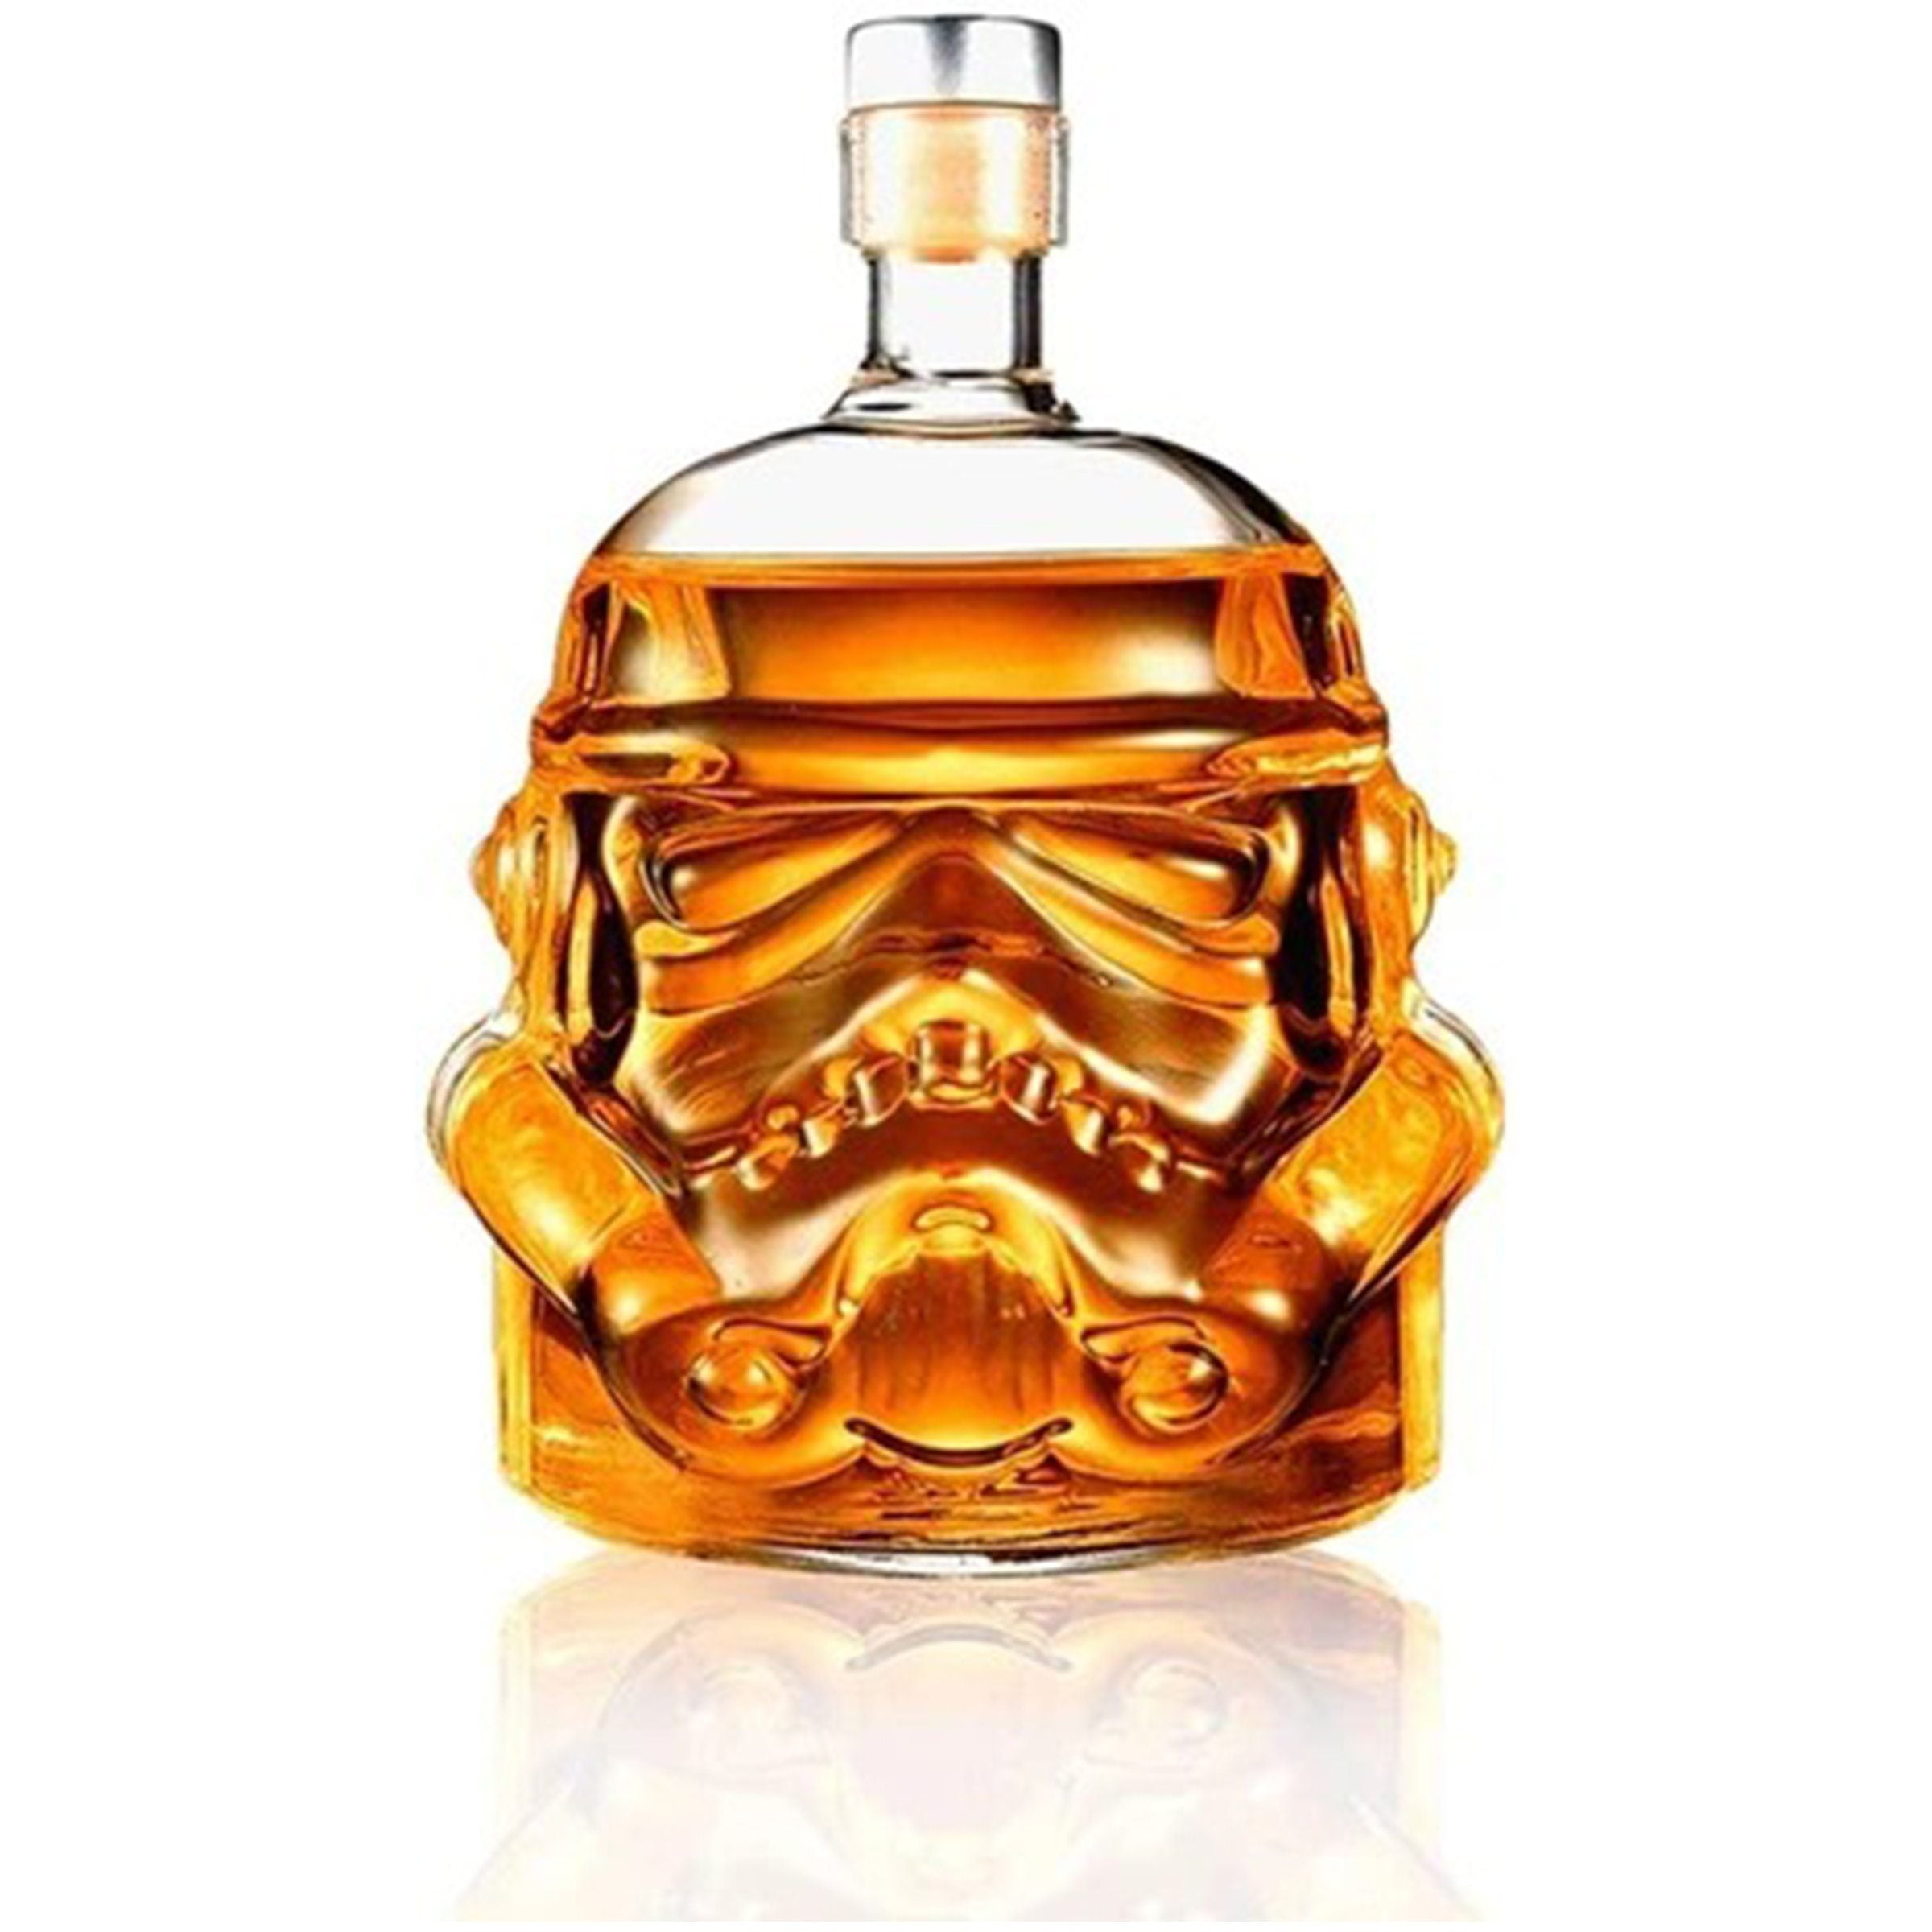 Brandy Beer AUTHOME Transparent Creative Star Wars 700ml Whiskey Flask Carafe Decanter，Stormtrooper Glass Bottle ，Wine Decanters，Whiskey Carafe,Awakens Helmet Glass Cup Heat-Resistance Cup or Whisky 